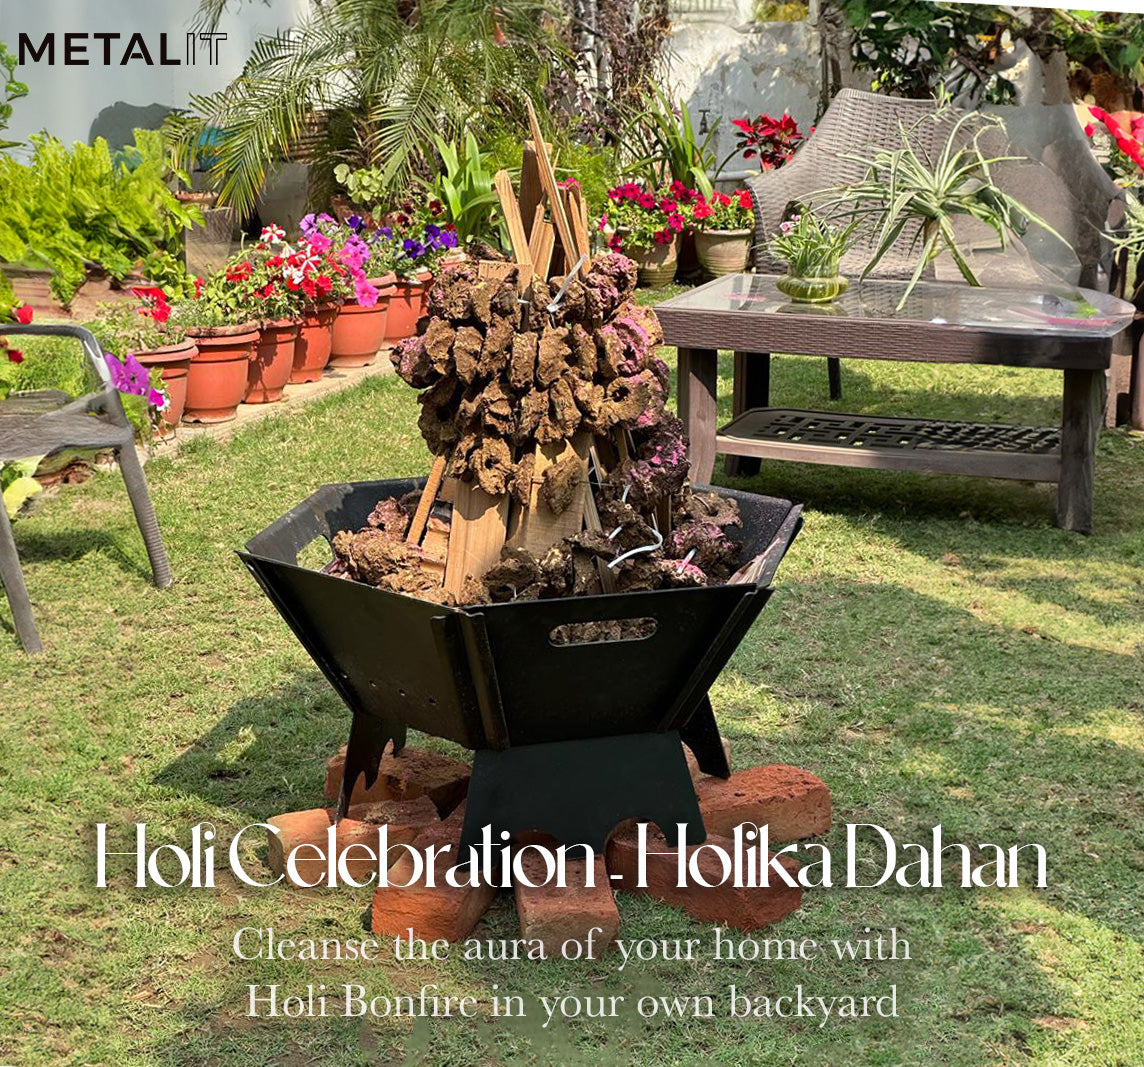 Hexa Basket collapsible outdoor fire pit